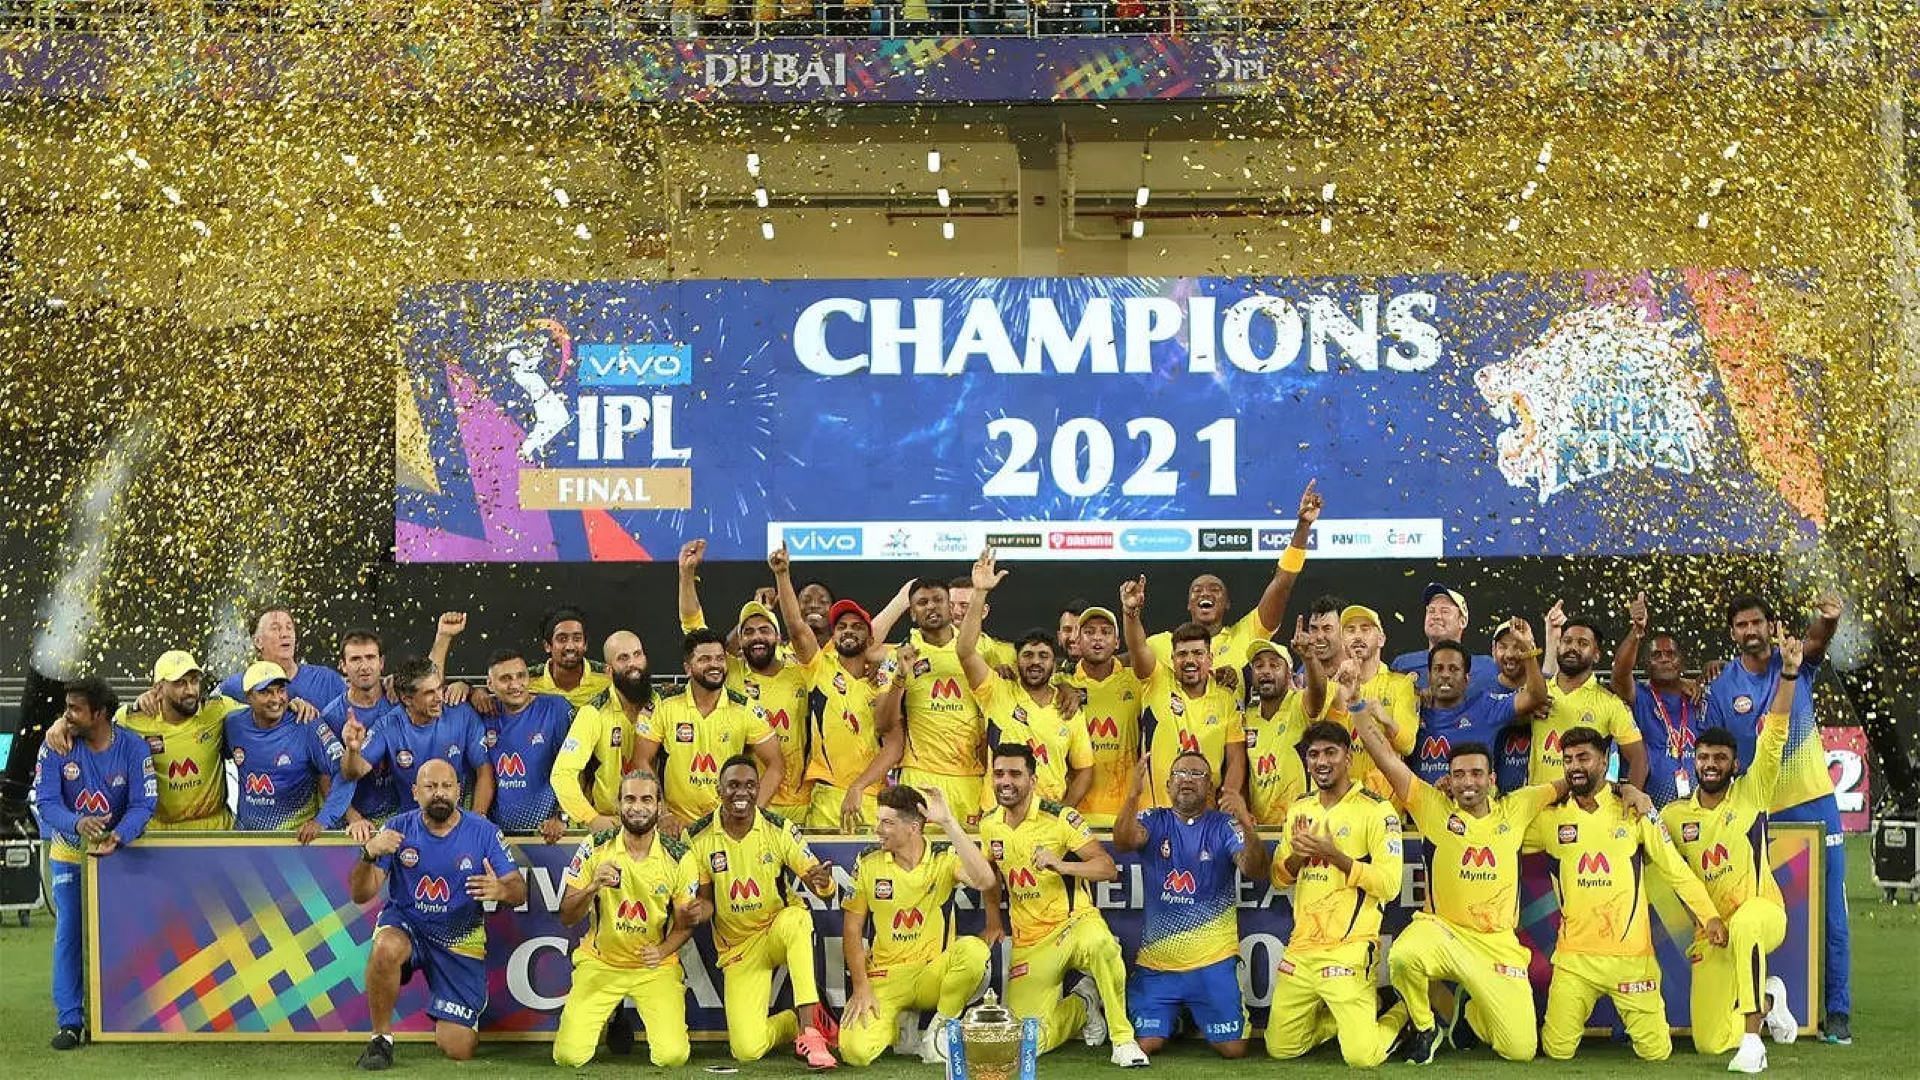 Chennai will look to repeat their heroics from when they last won the IPL title in 2021.